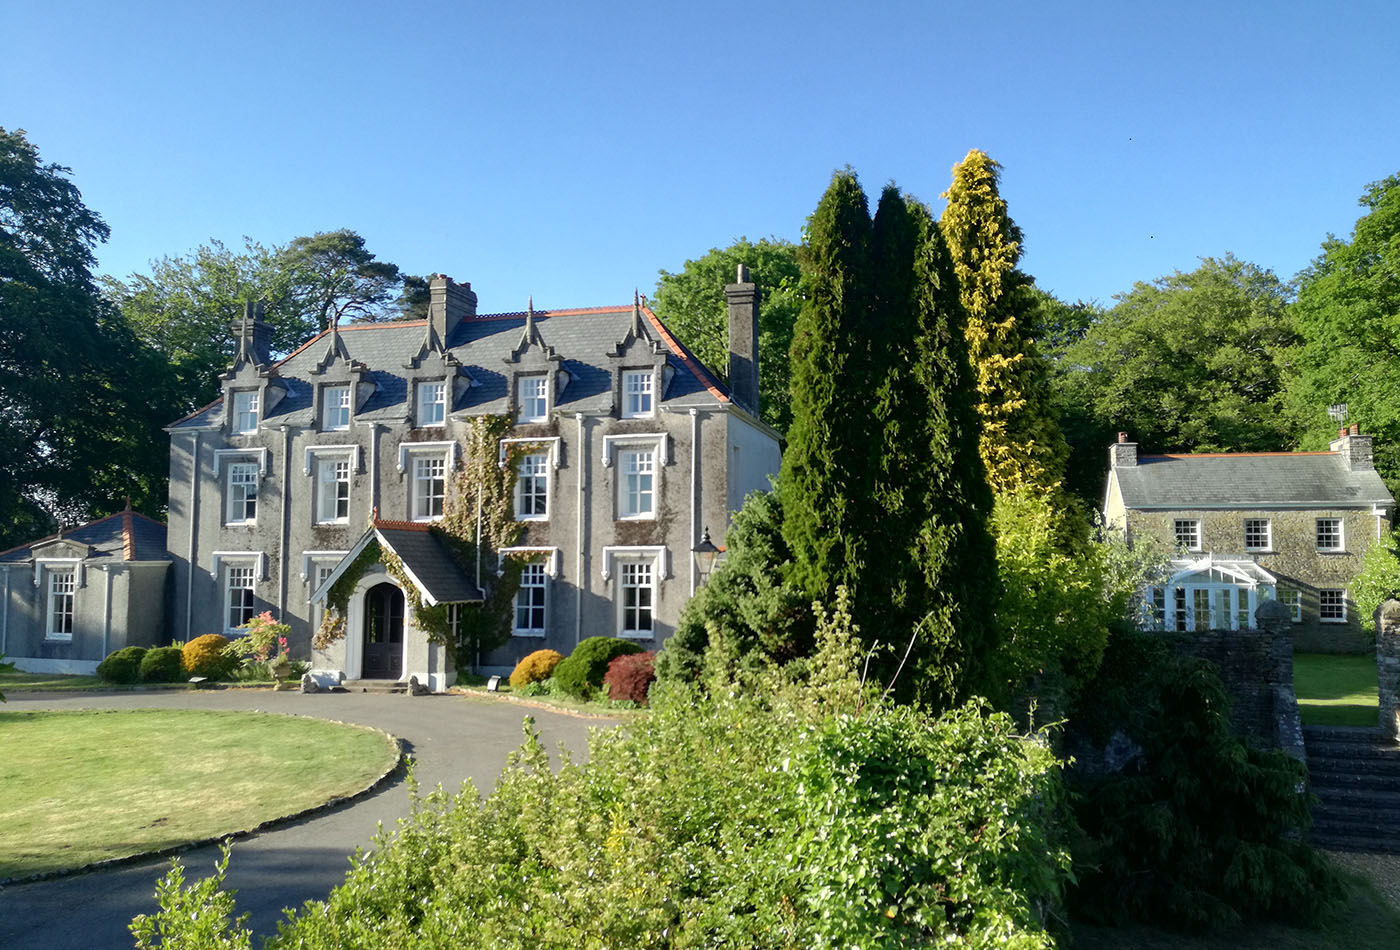 Yr Hen Ysgol is situated in the gardens of Plas Cilybebyll manor